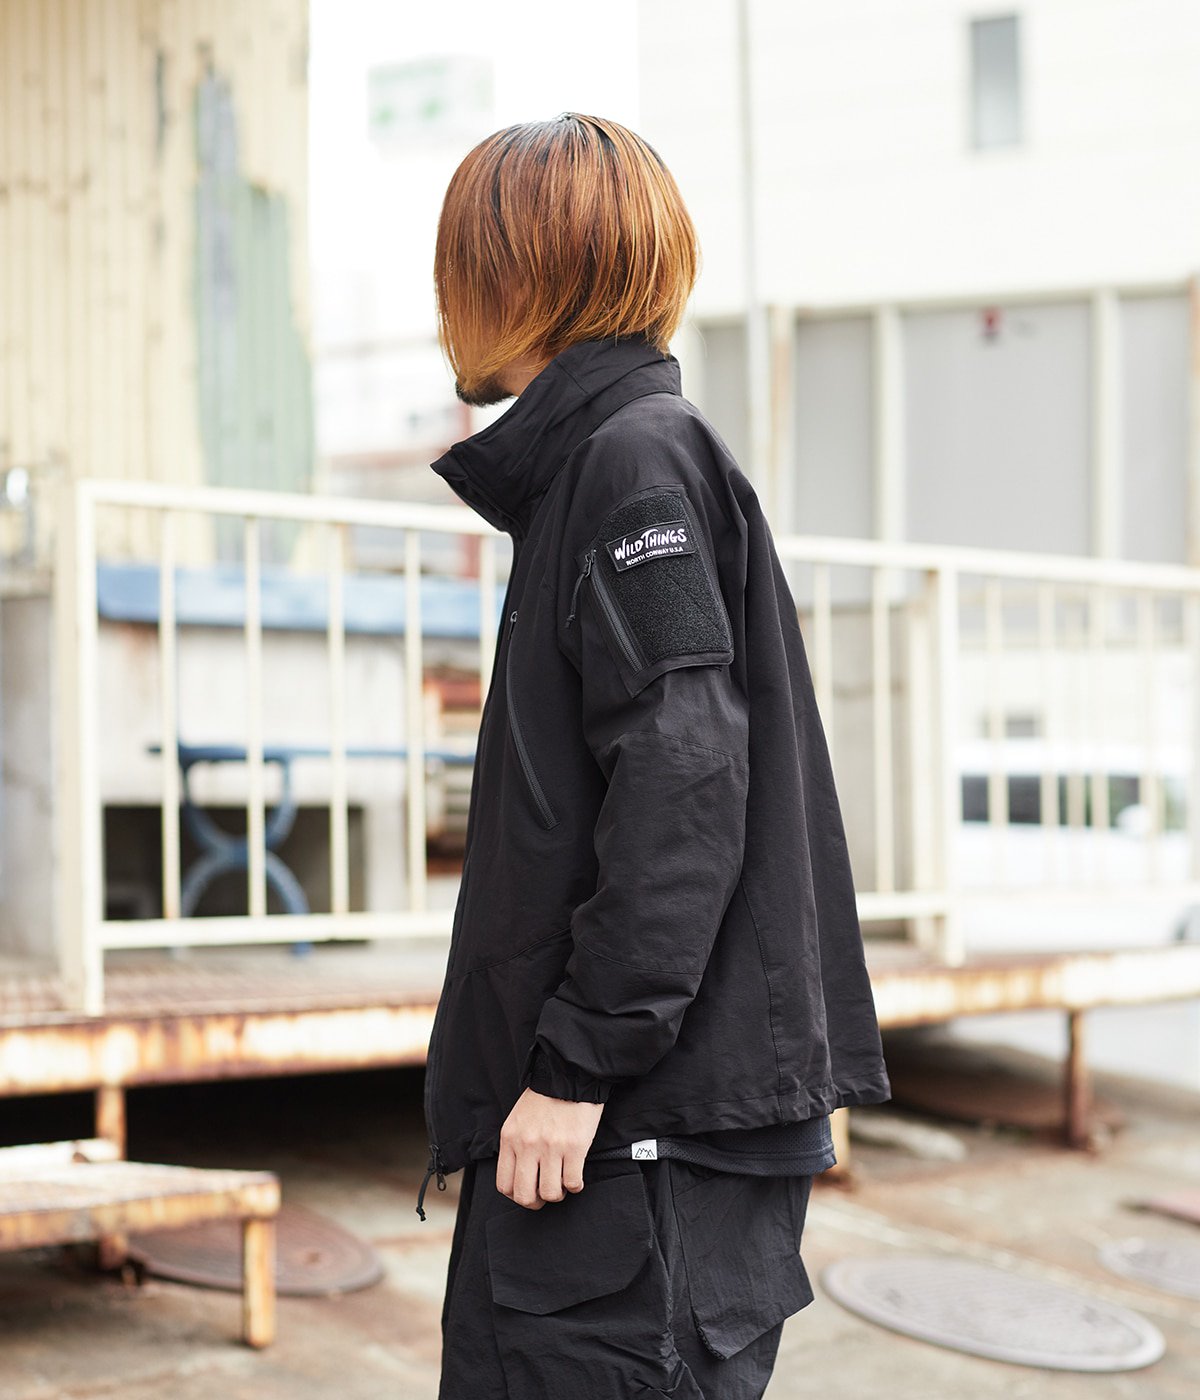 ONLY ARK】別注 LEVEL5 SOFT SHELL JACKET | WILD THINGS(ワイルド